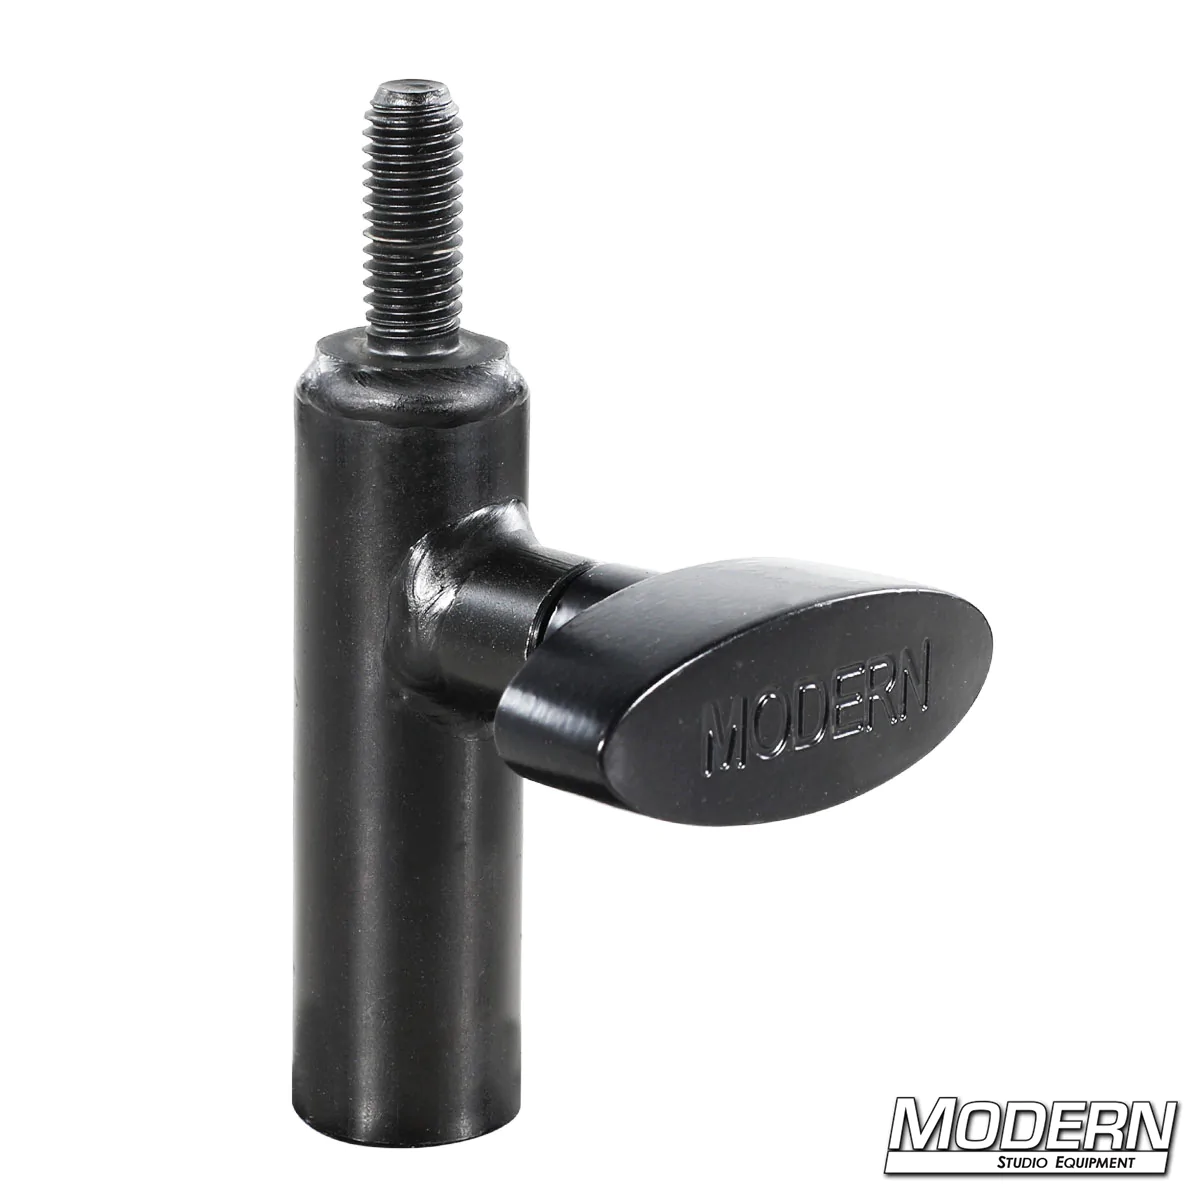 5/8" Receiver with 3/8" Male Thread - Black Zinc